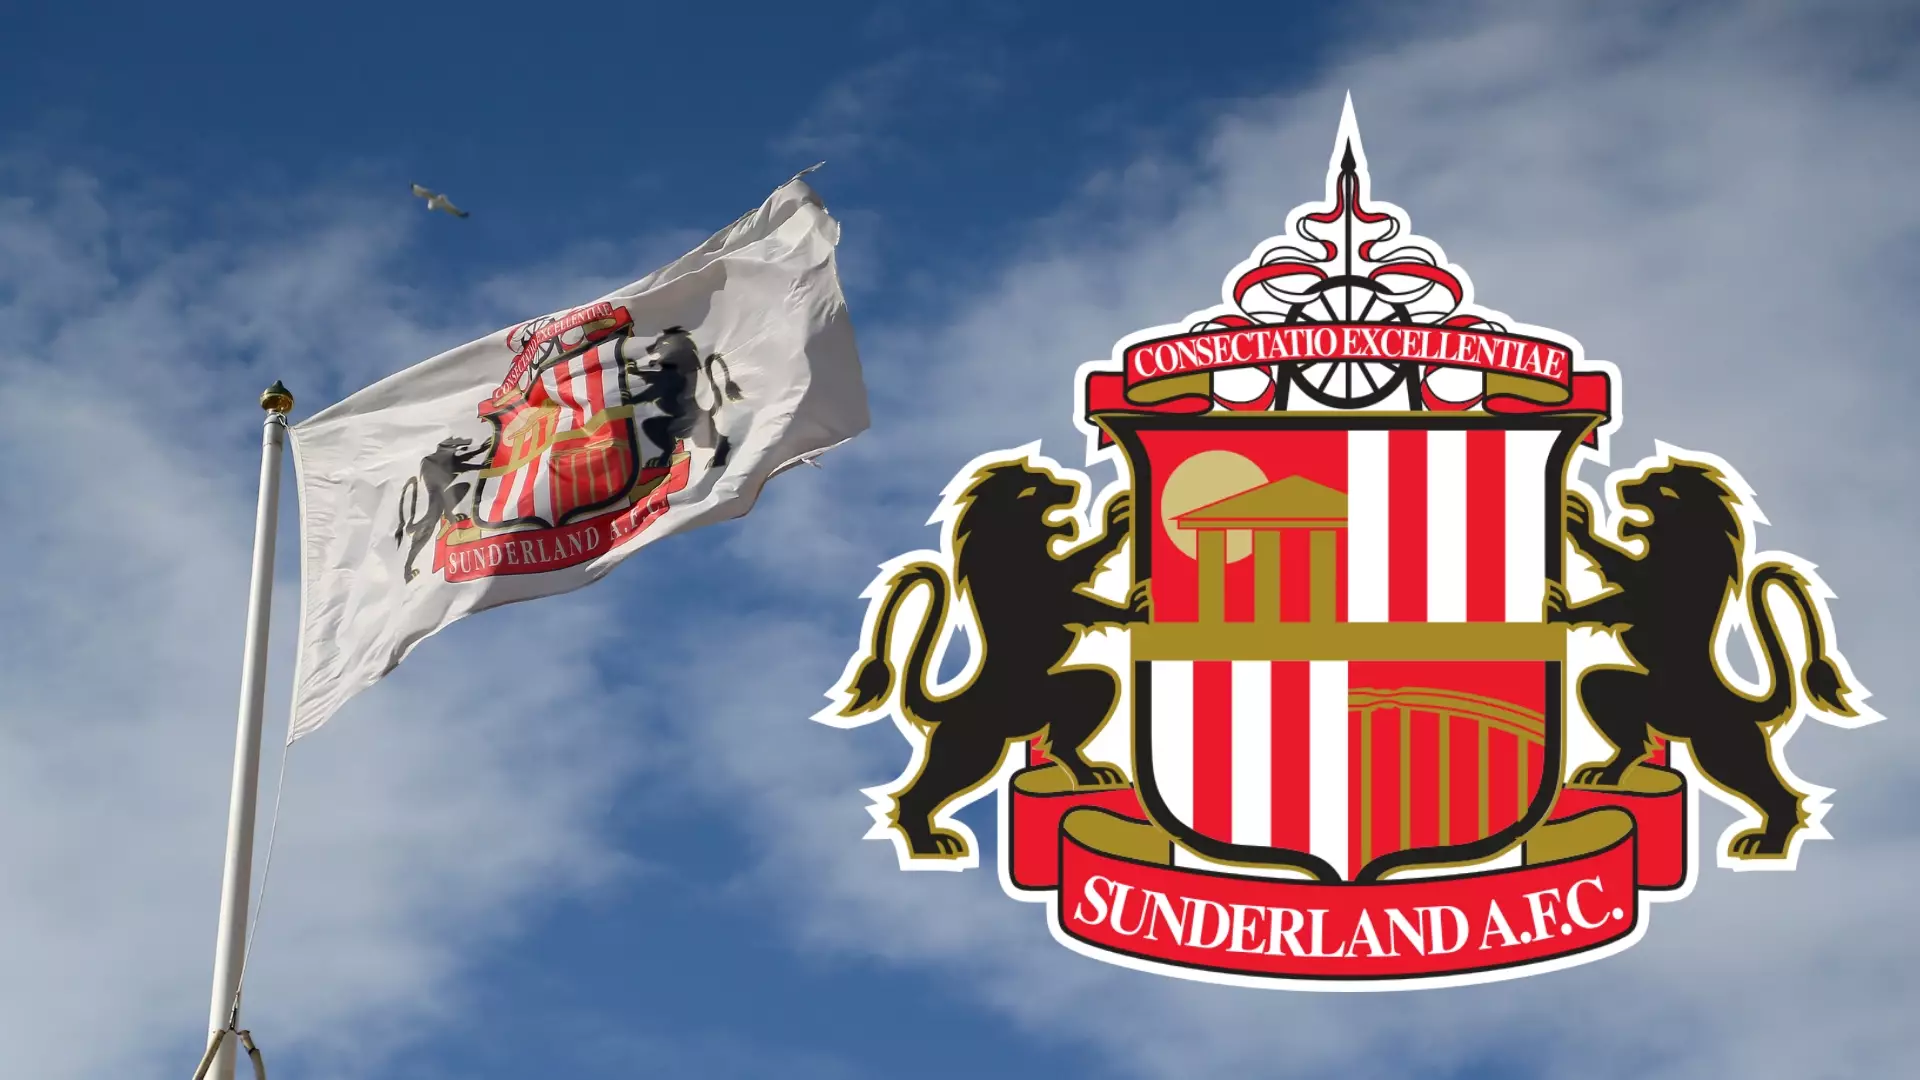 Sunderland Academy Physio Arrested After Allegations Of Sexual Grooming A Player Under Age Of 16